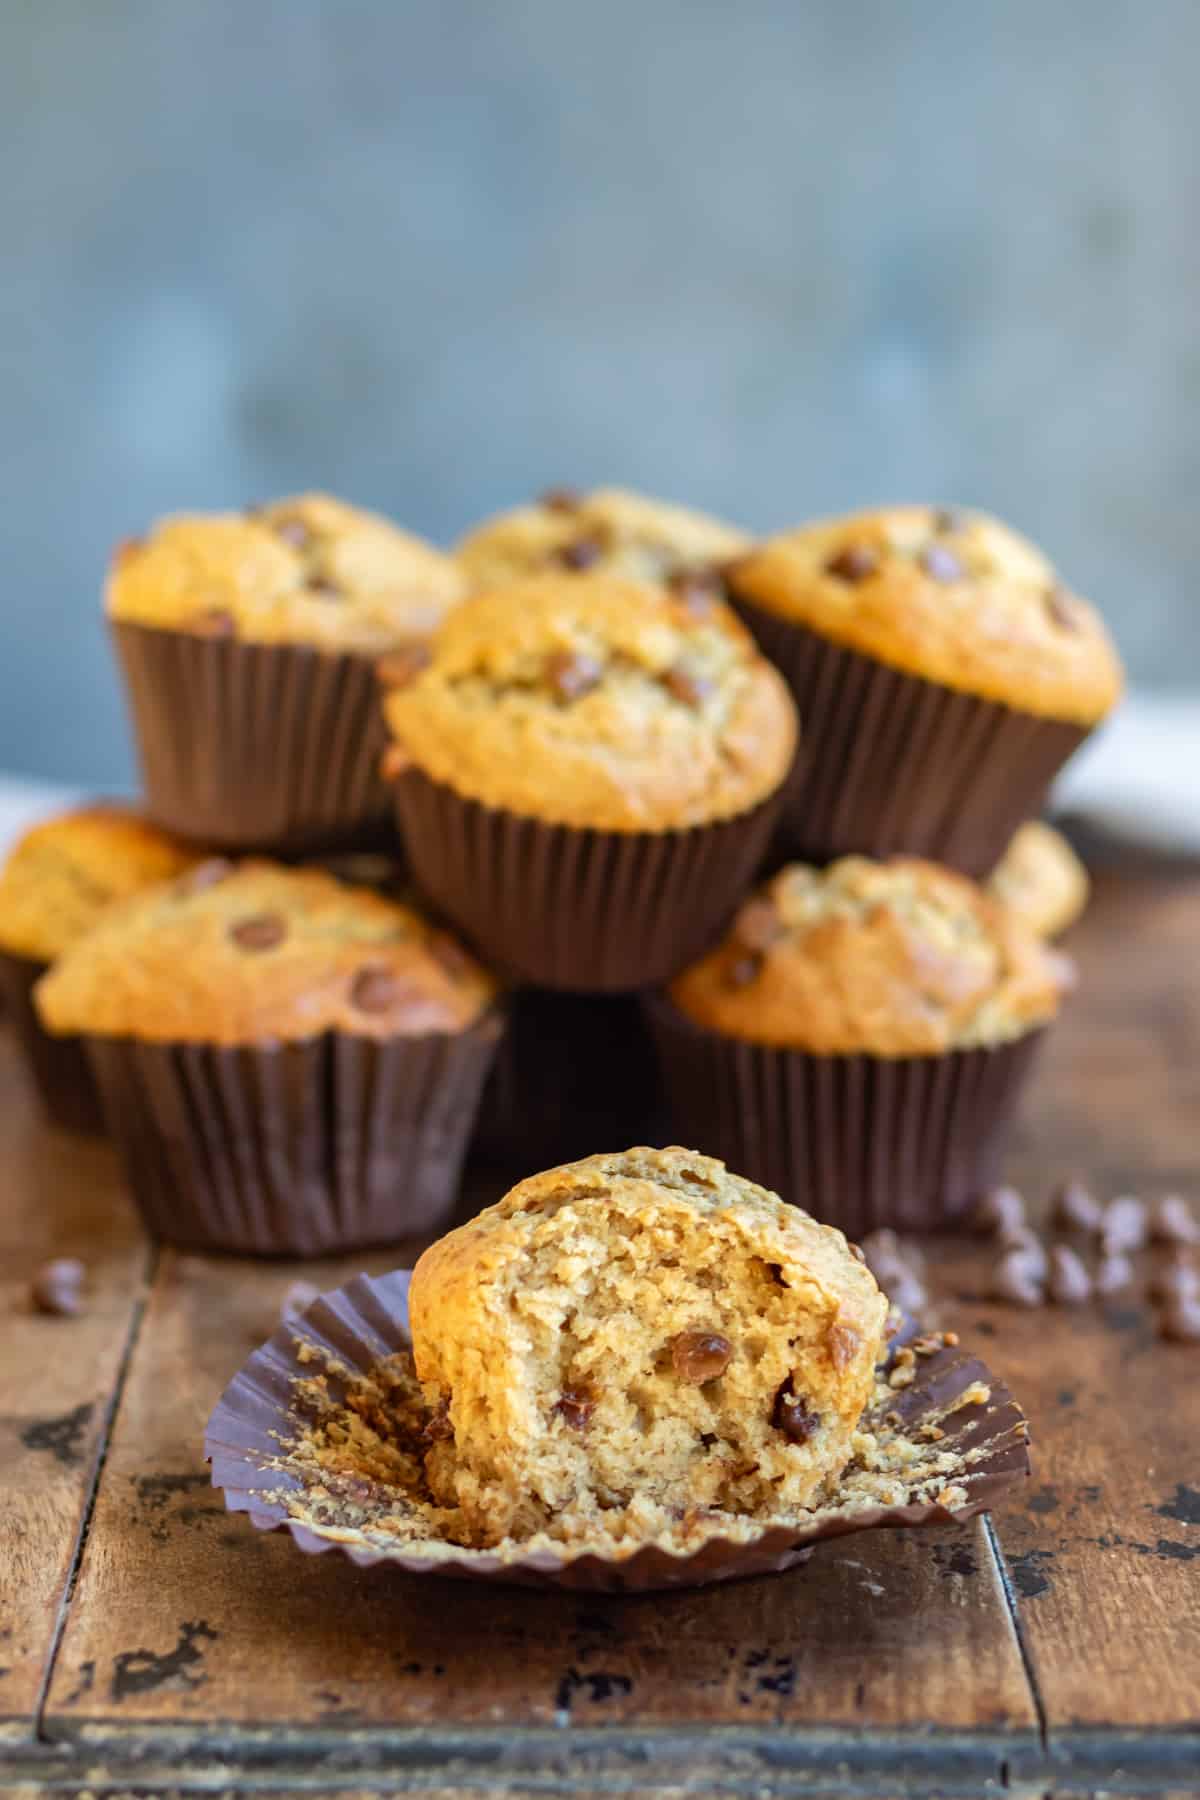 A peanut butter chocolate chip muffin with a bite out, in front of a pile of muffins.